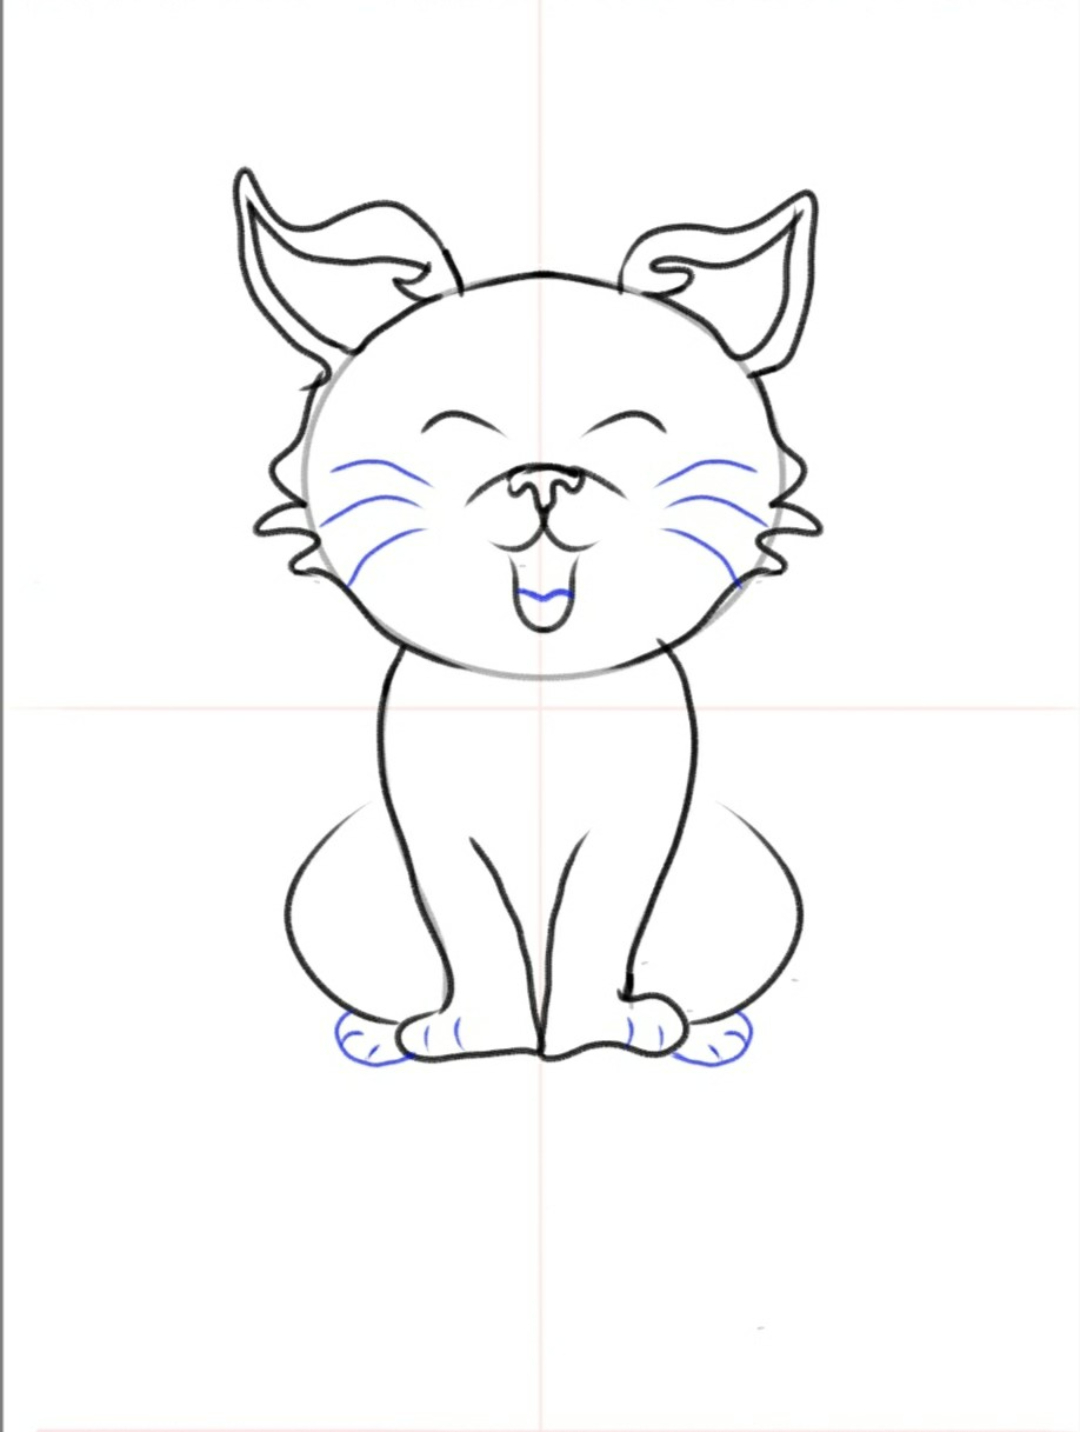 How-to-draw-a-cat-in-9-easy-steps